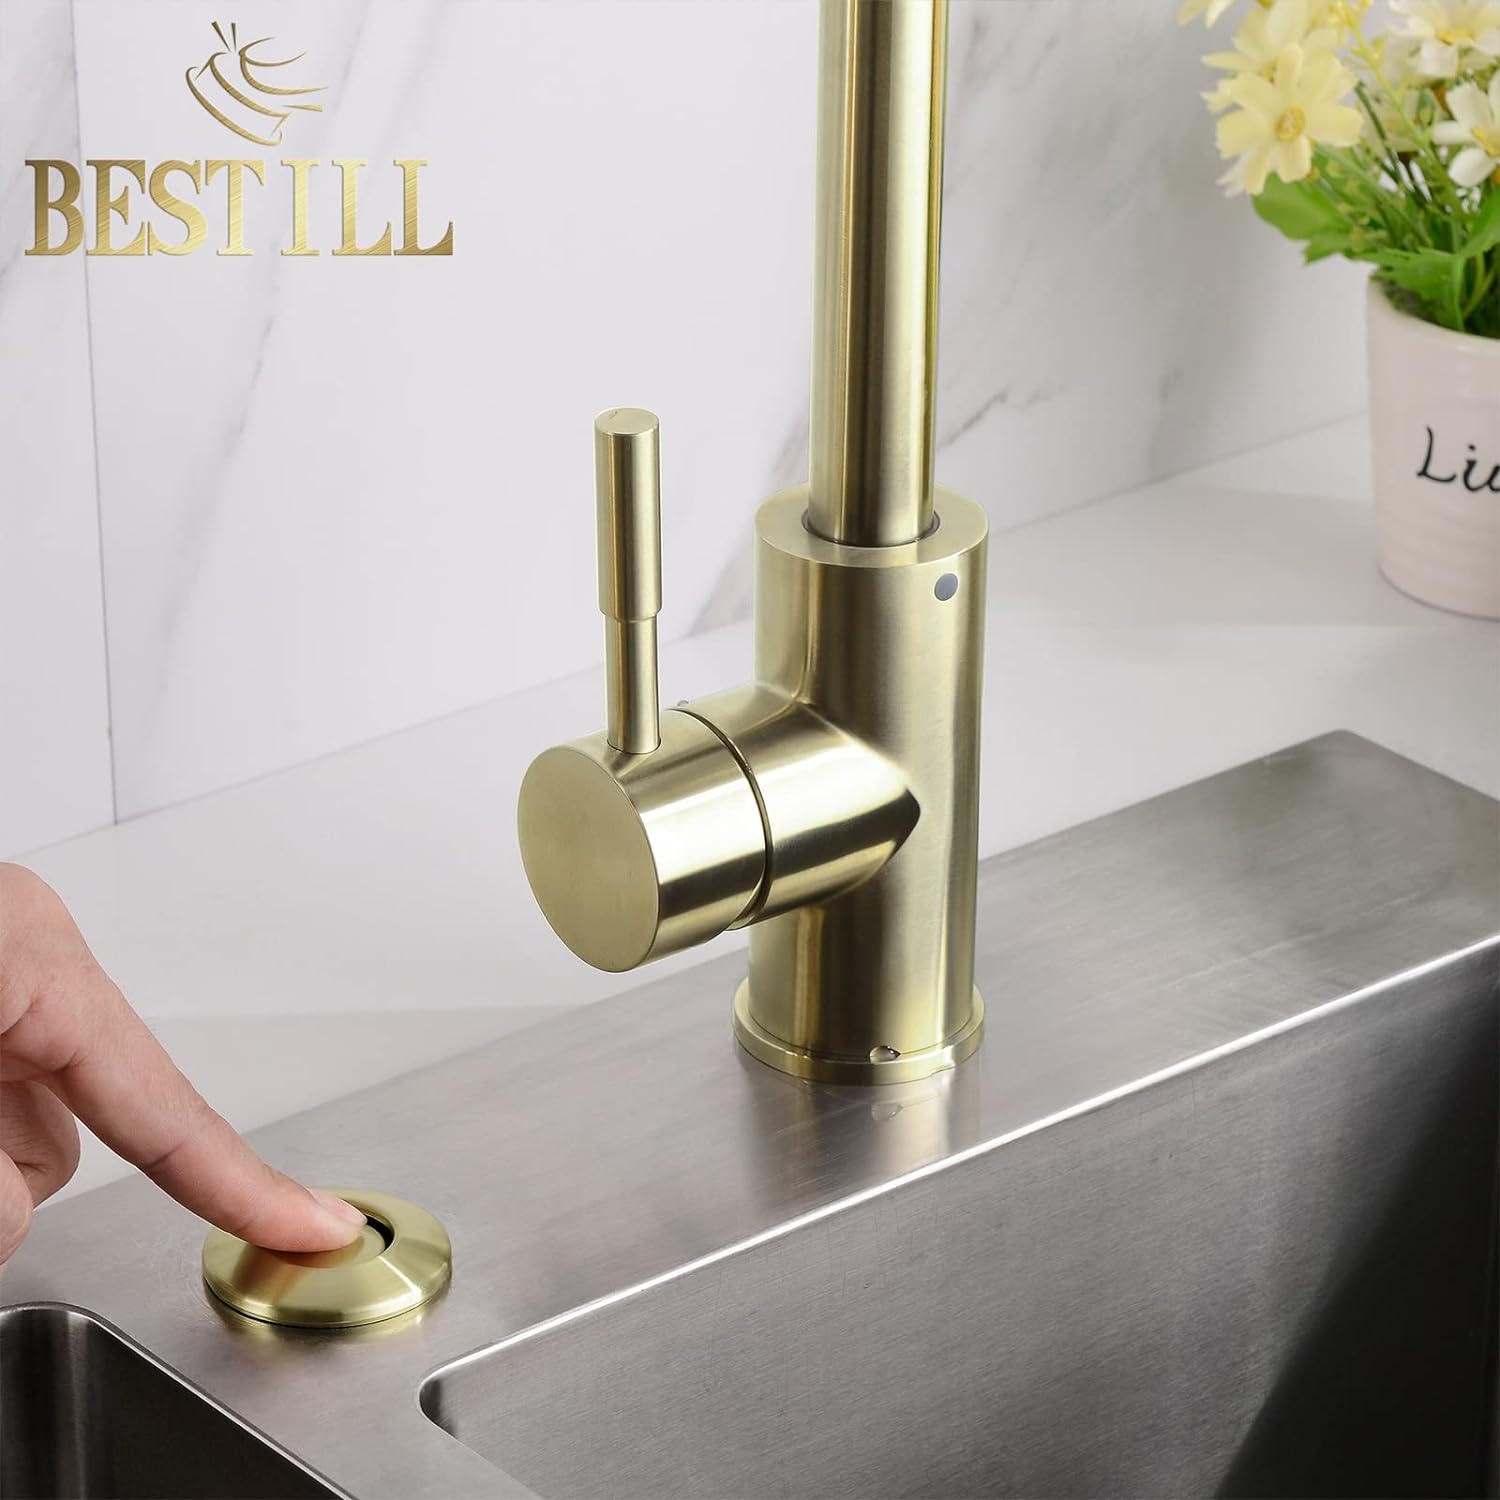 BeStill Sink Top Garbage Disposal Air Switch Kit with Dual Outlet, Brushed Gold (Long Push Button with Brass Cover)